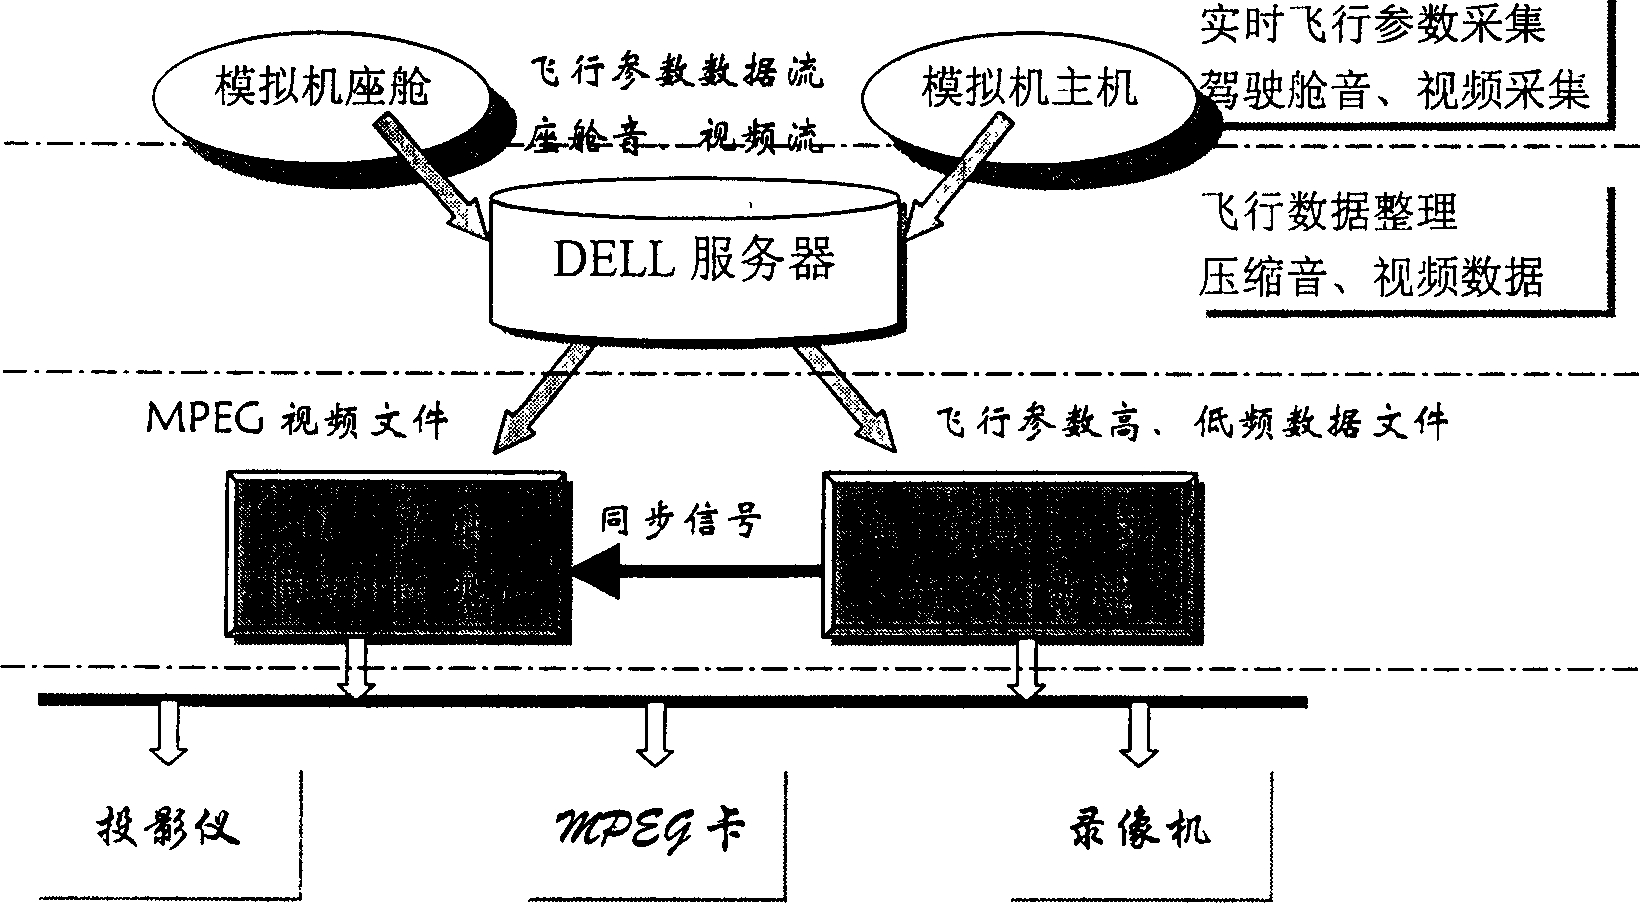 Computer-aided teaching system and method for stimulated aviation training